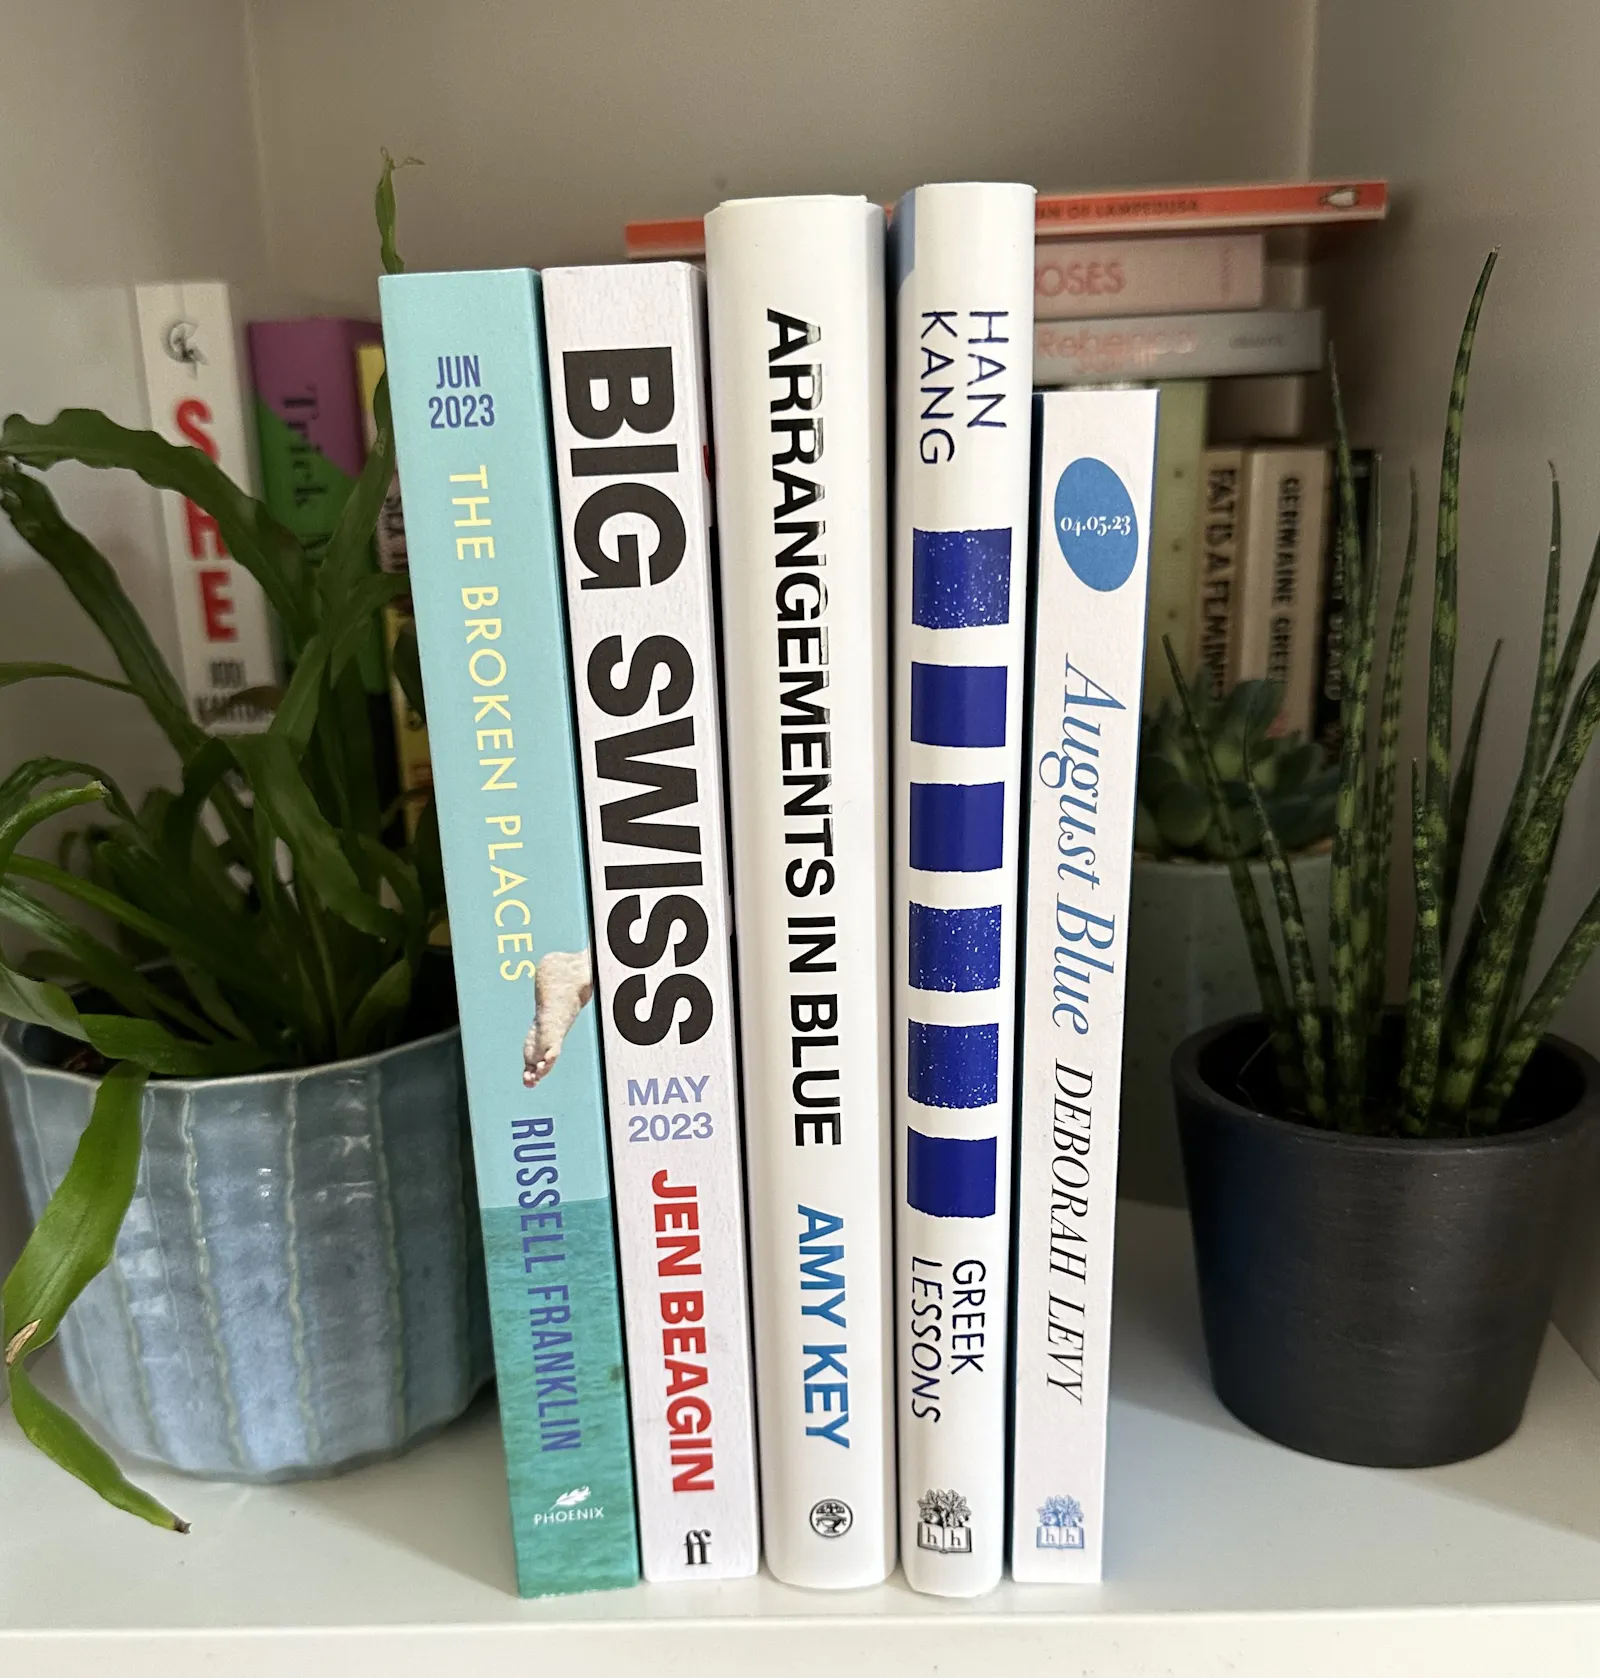 A selection of novels published in spring 2023 in front of some houseplants